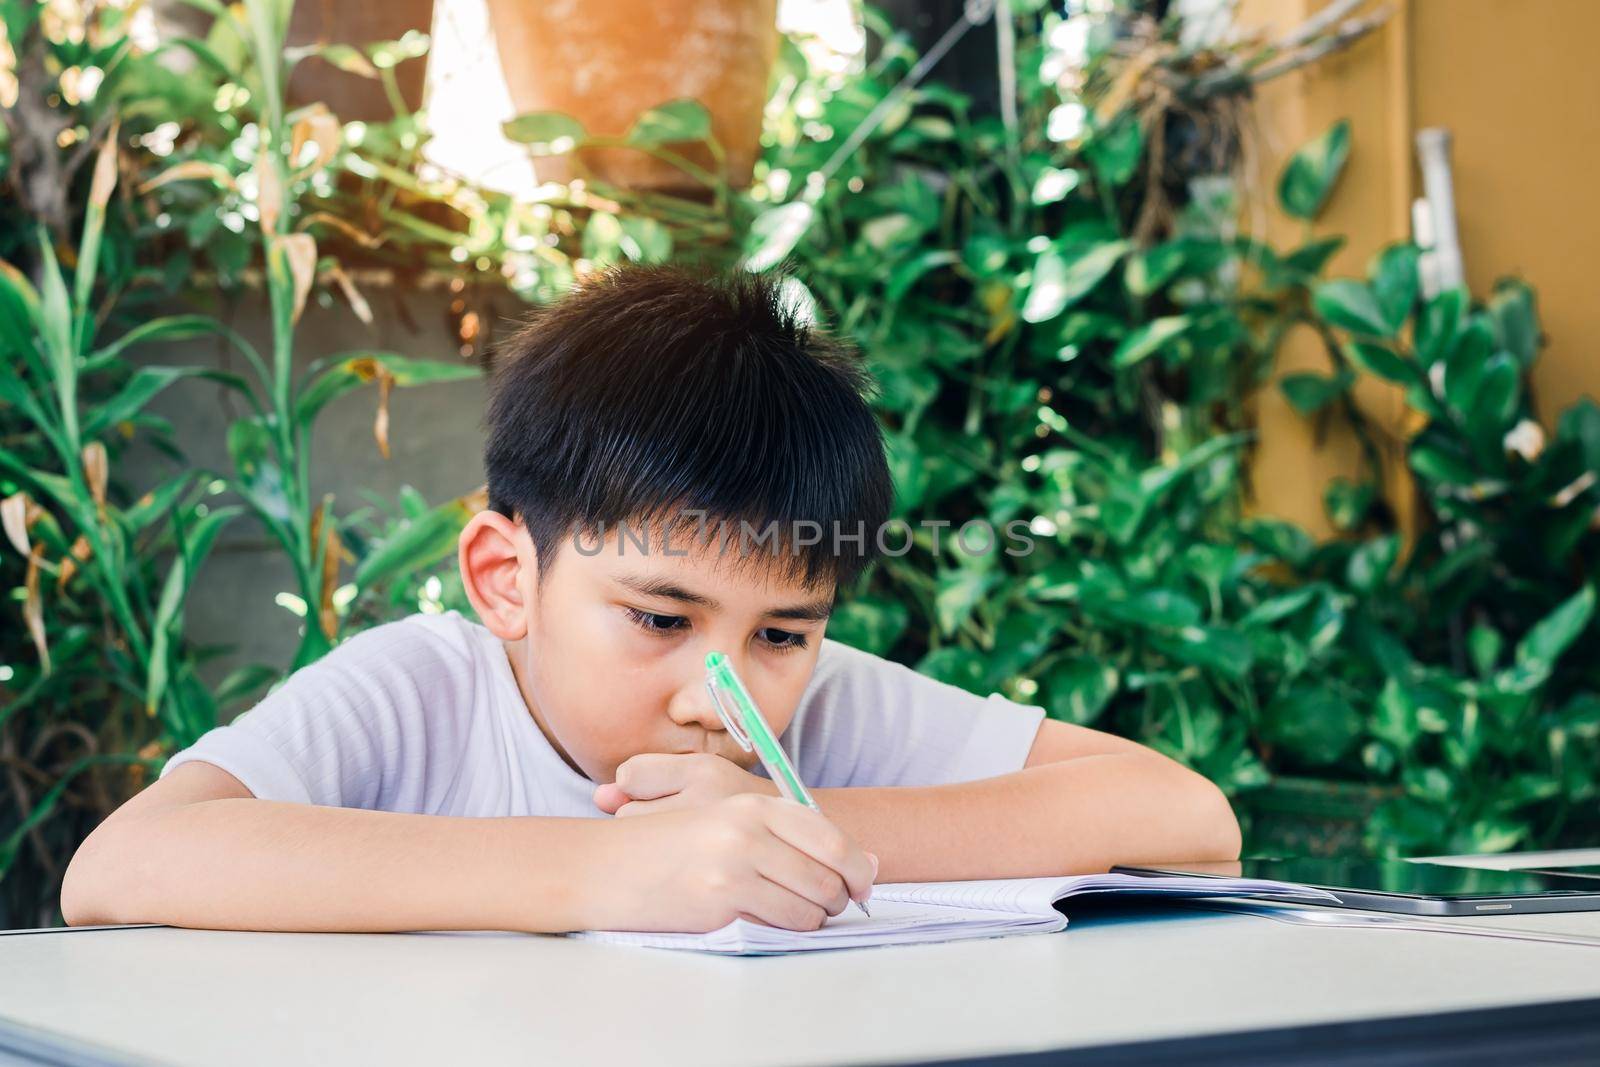 Cute Asian teenage doing his homework using a pen to write on a book.